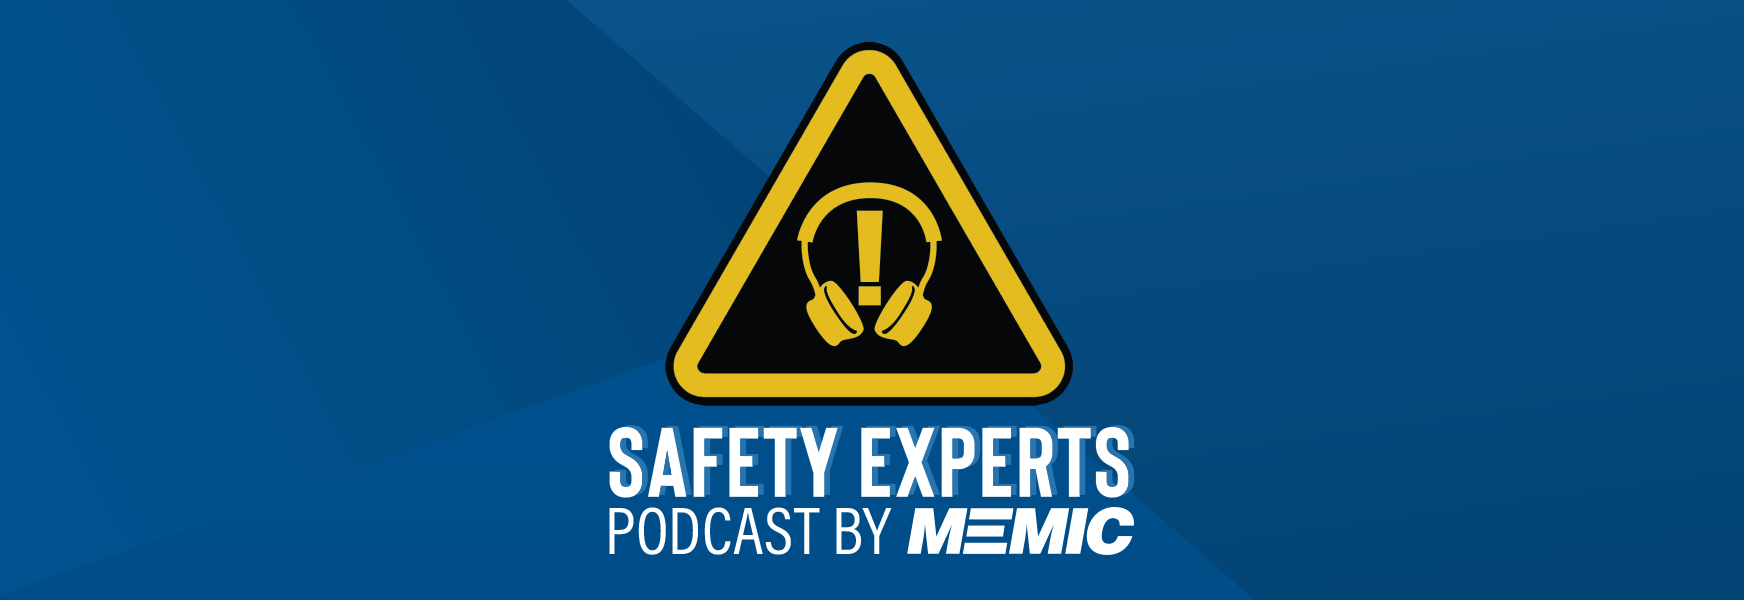 Safety Experts Podcast by MEMIC